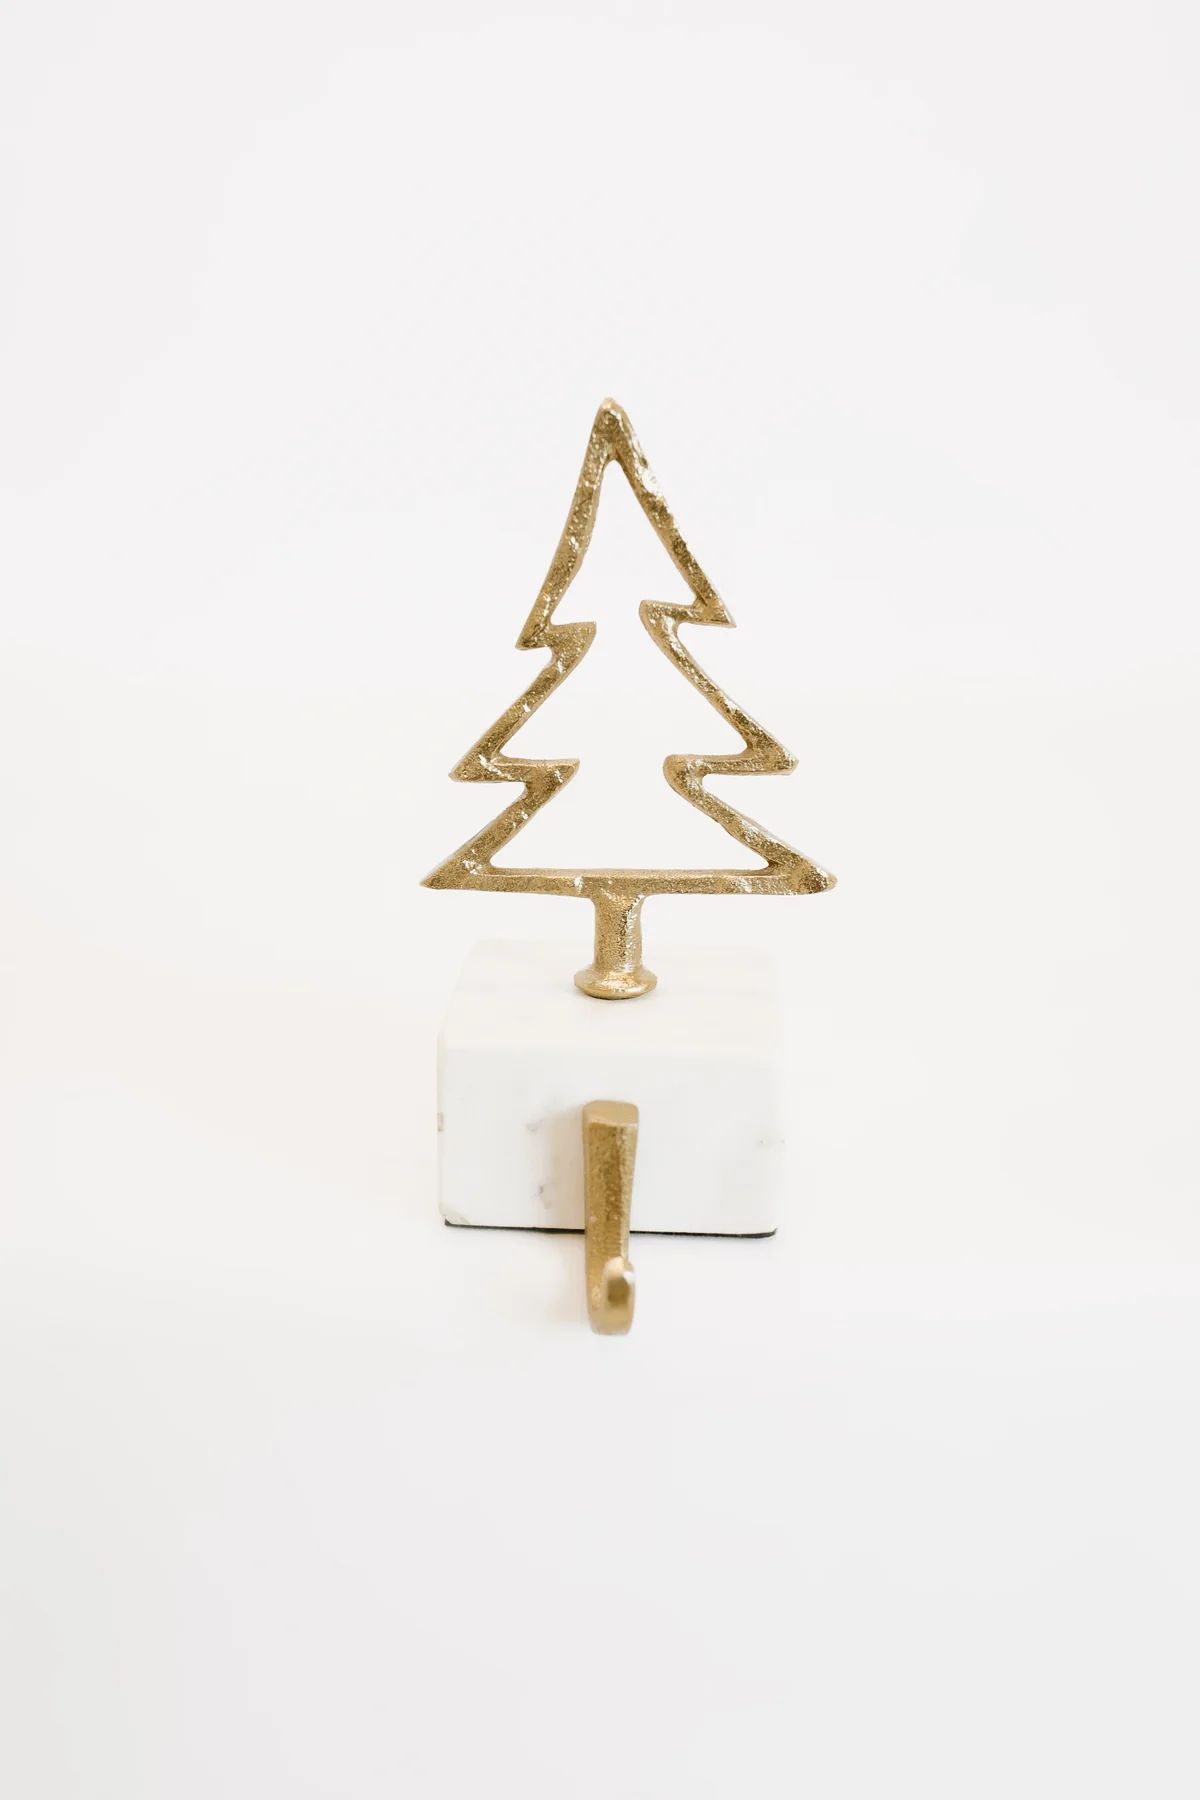 Winter Marble + Brass Tree Stocking Holder | THELIFESTYLEDCO